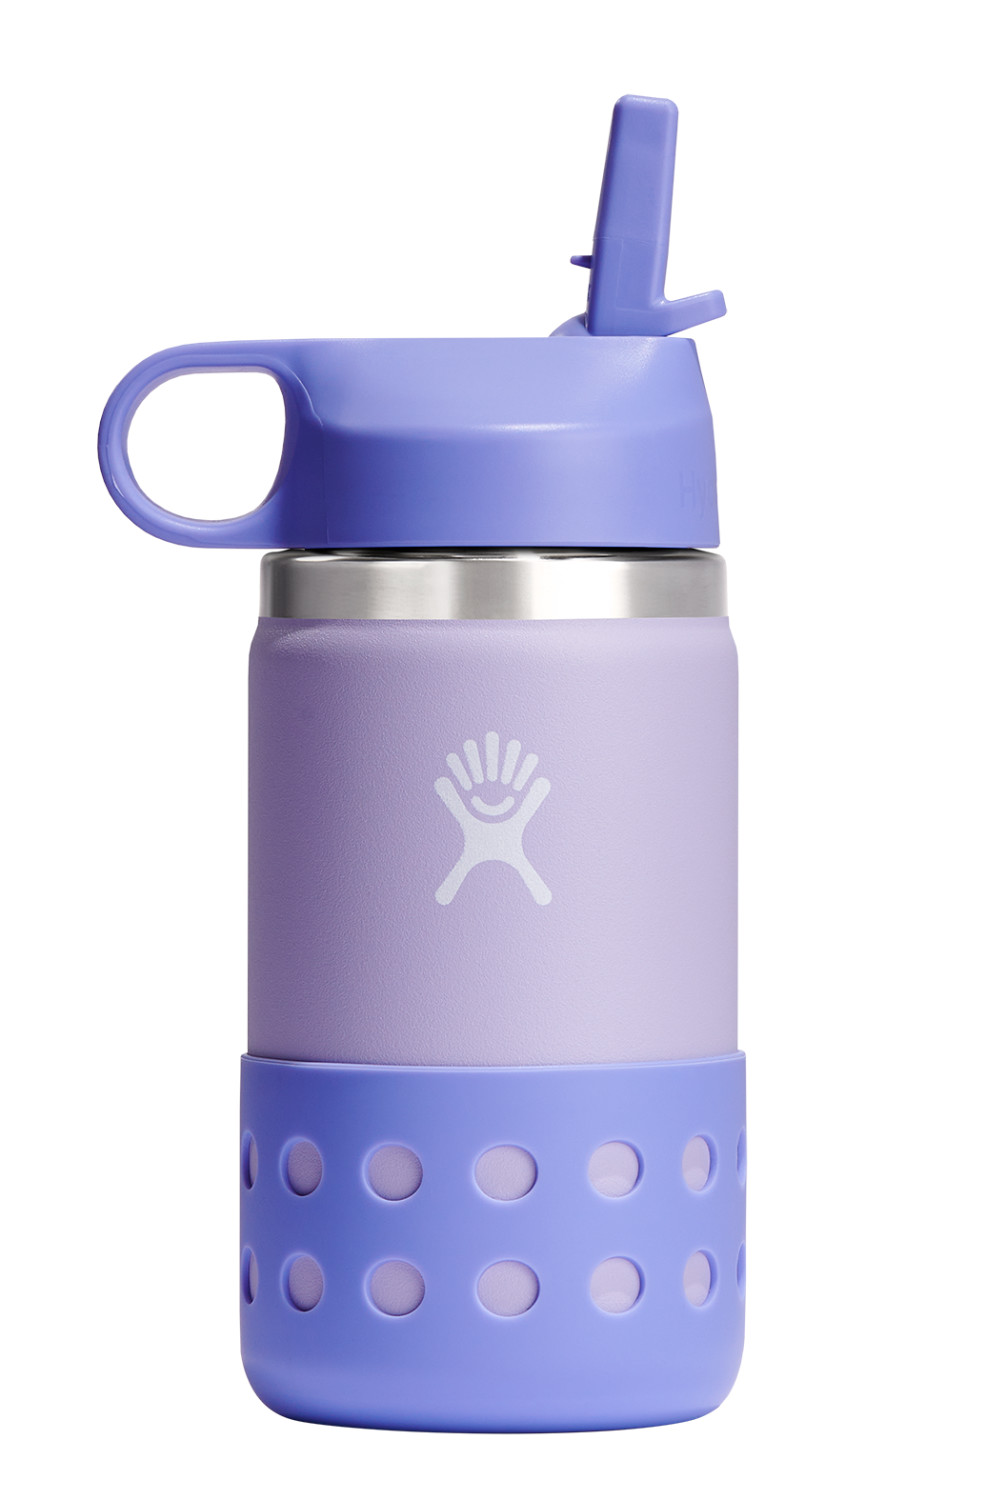 Hydro Flask 24 oz Standard Mouth Bottle with Boot